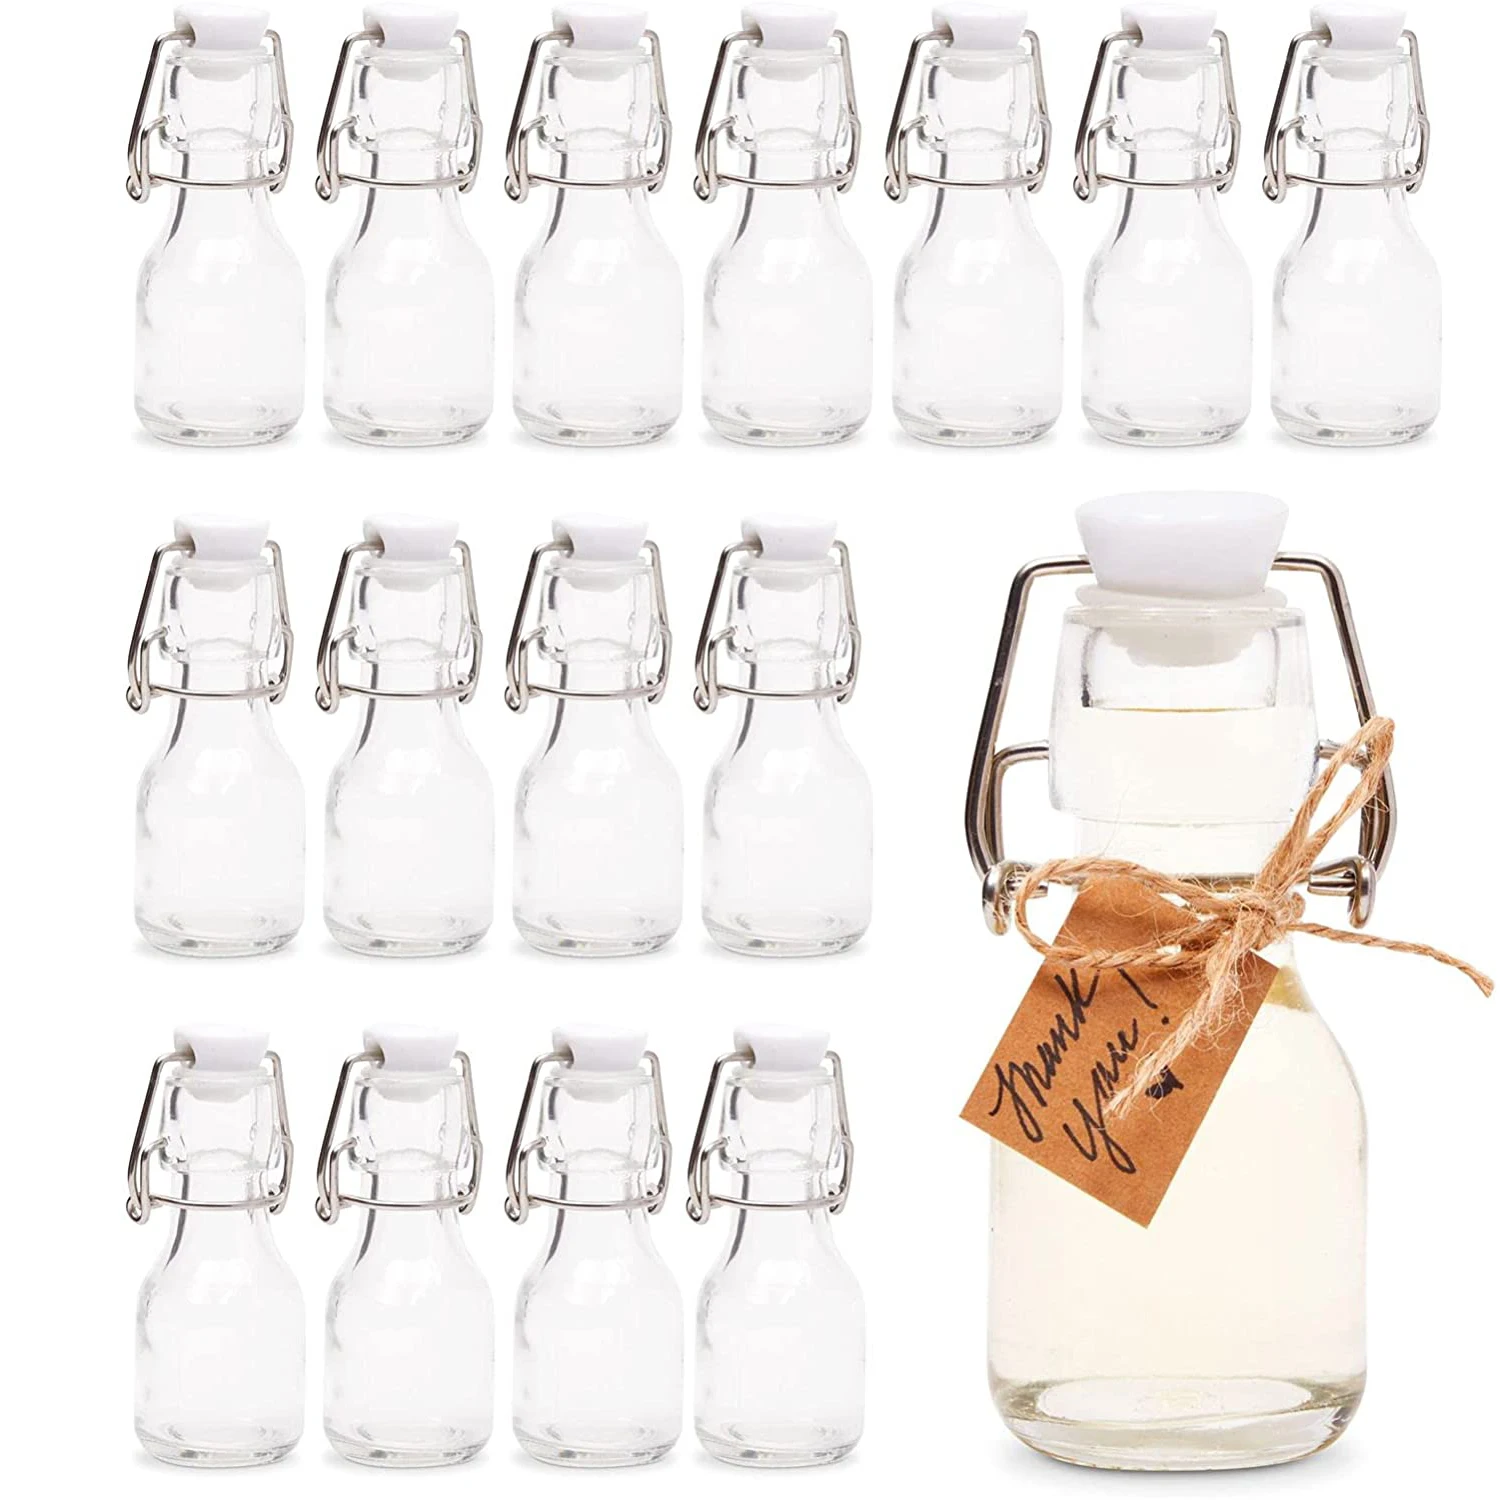 60ML Mini Swing Top Glass Bottles with Tags and Twine for Party Favors